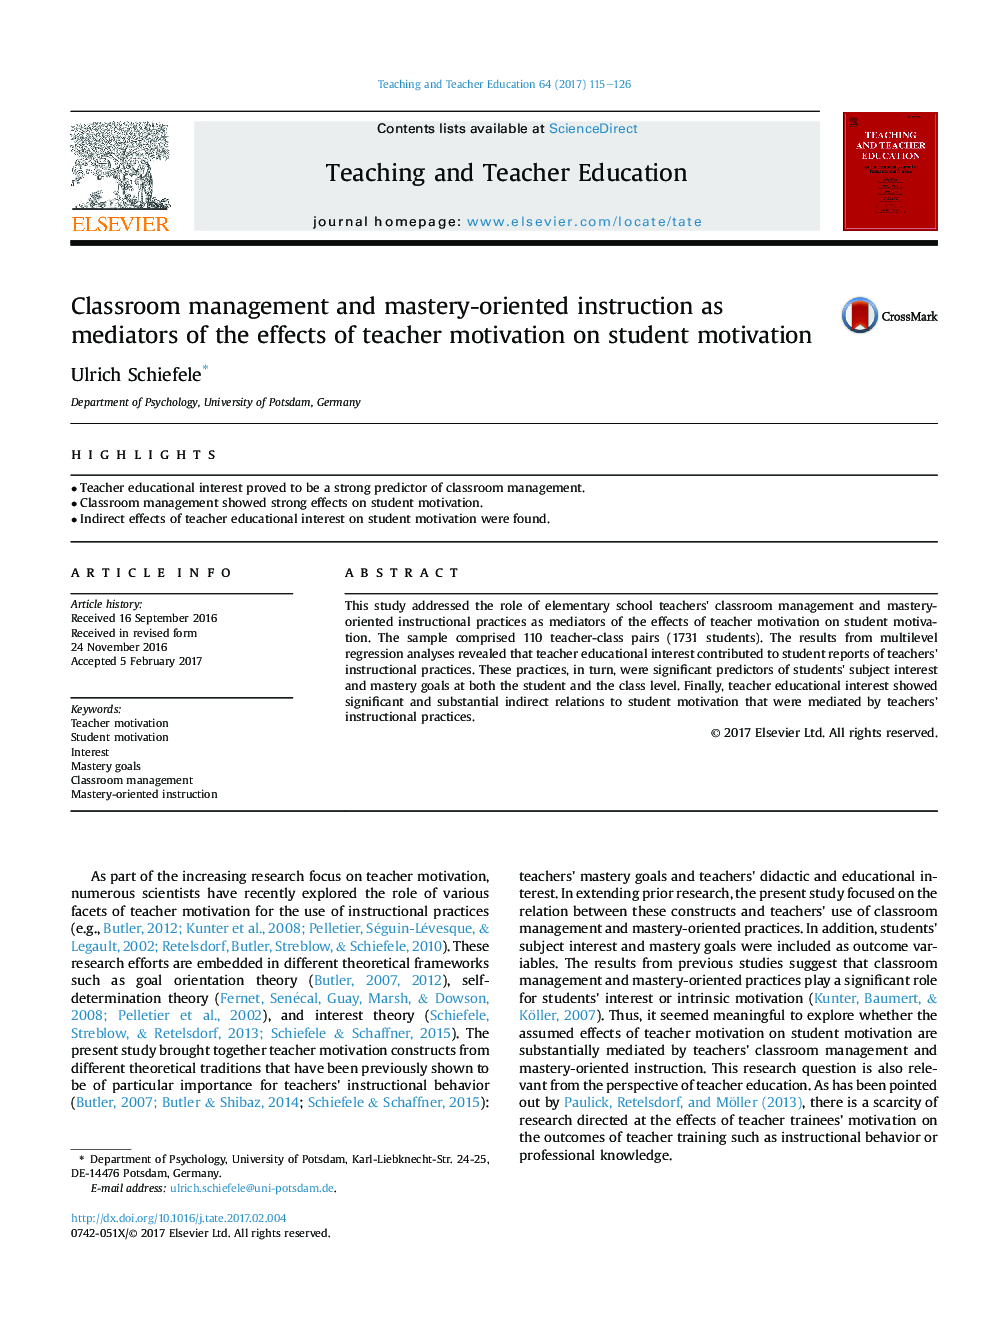 Classroom management and mastery-oriented instruction as mediators of the effects of teacher motivation on student motivation